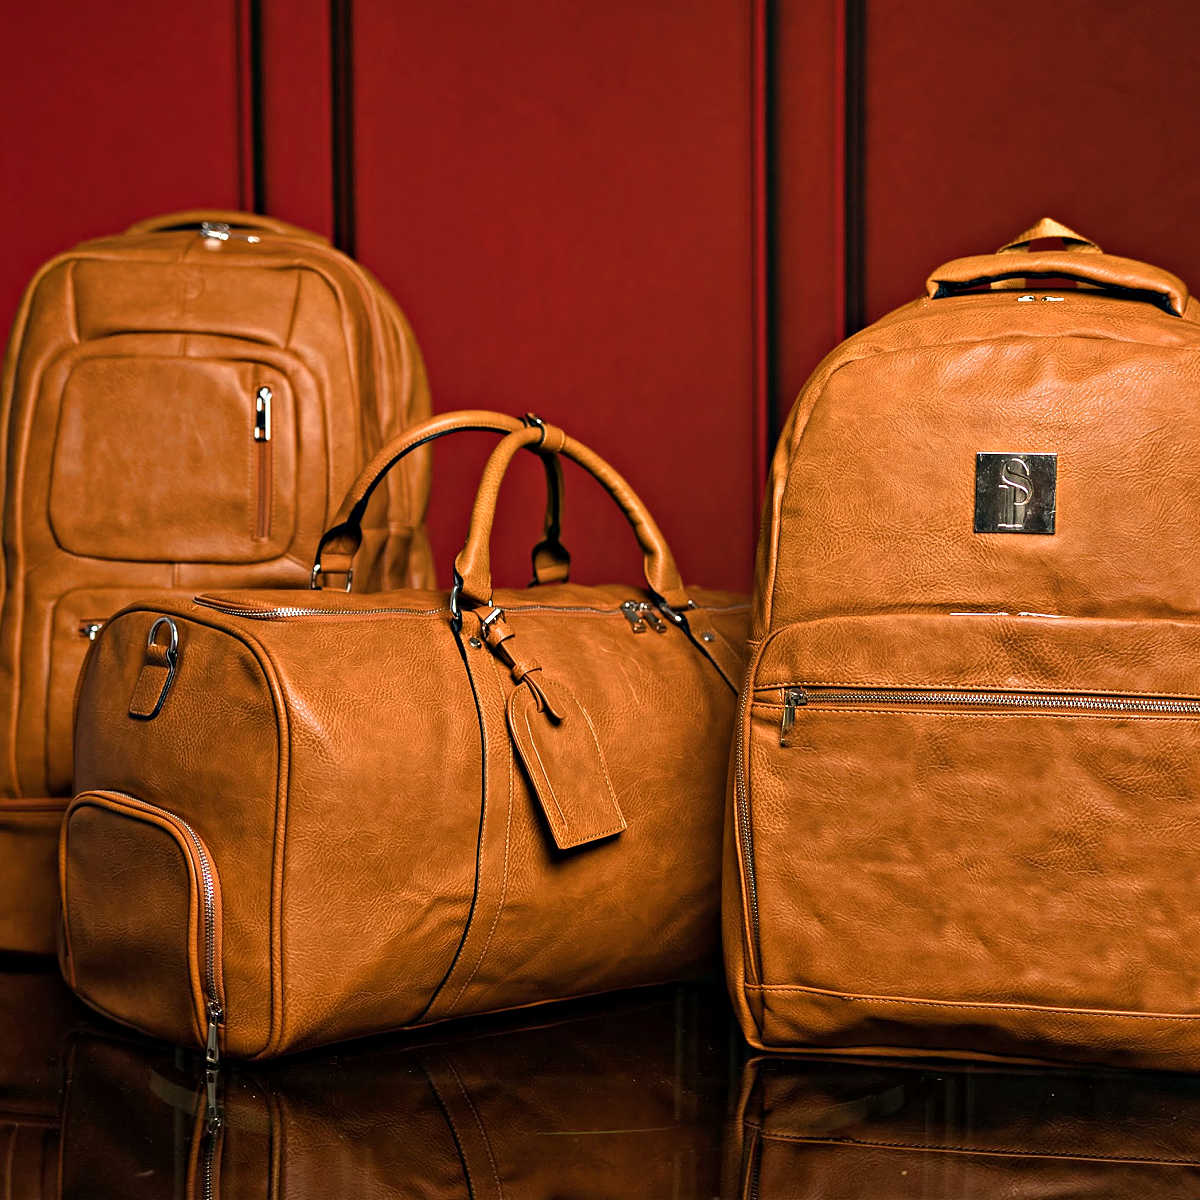 Brown Tumbled Leather 3 Bag Set - Sole Premise